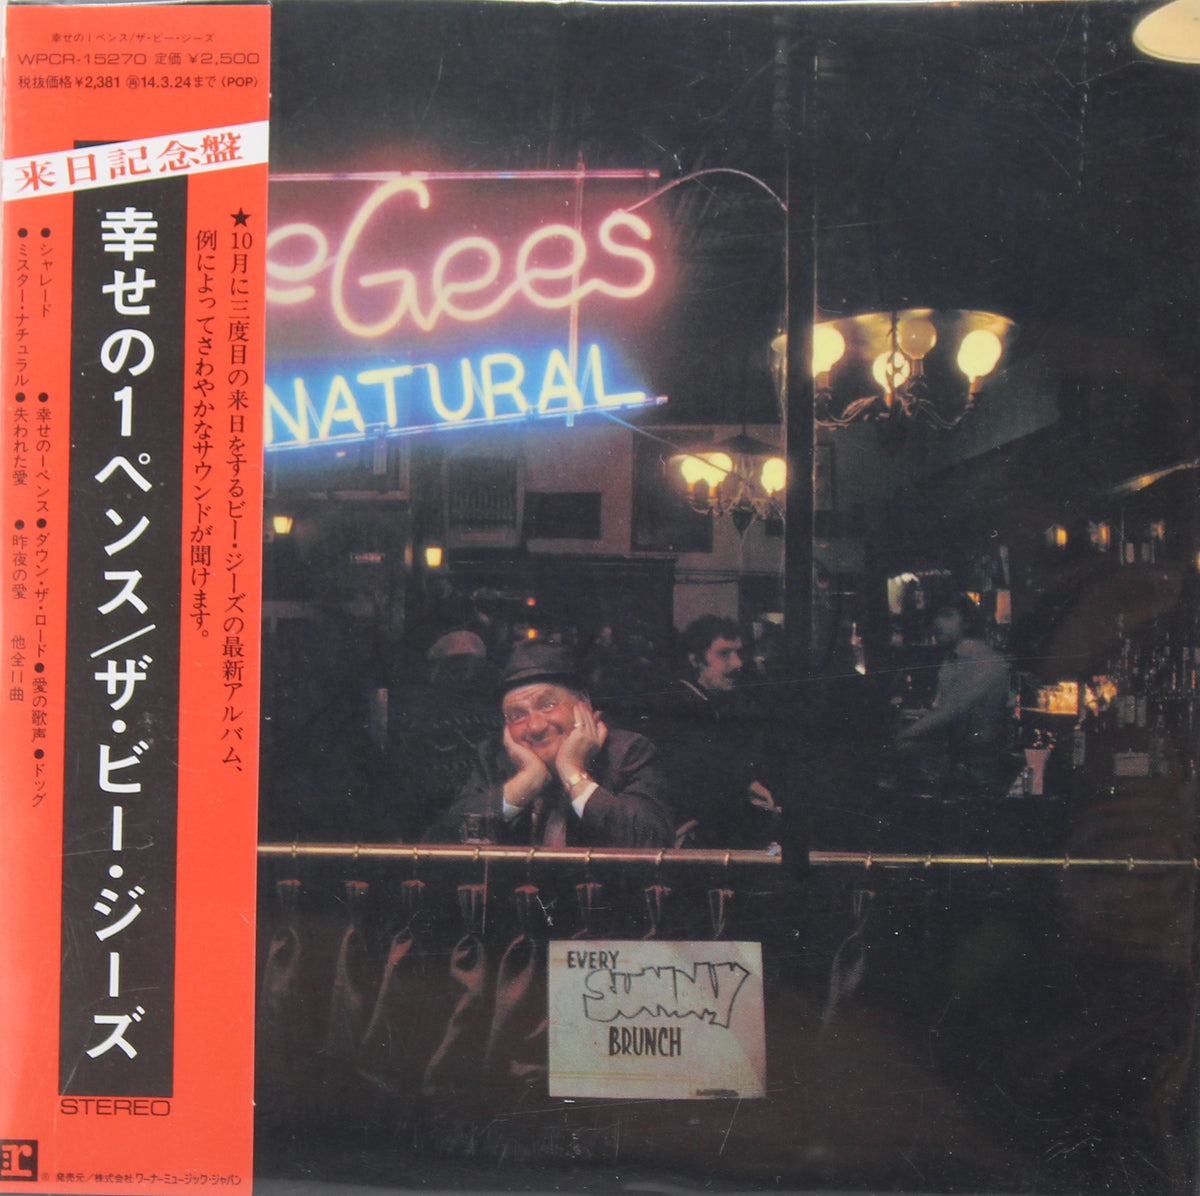 Bee Gees = ビー・ジーズ* – Mr. Natural = ミスター・ナチュラル, CD, Album, Limited Edition, Reissue, Japan 2013